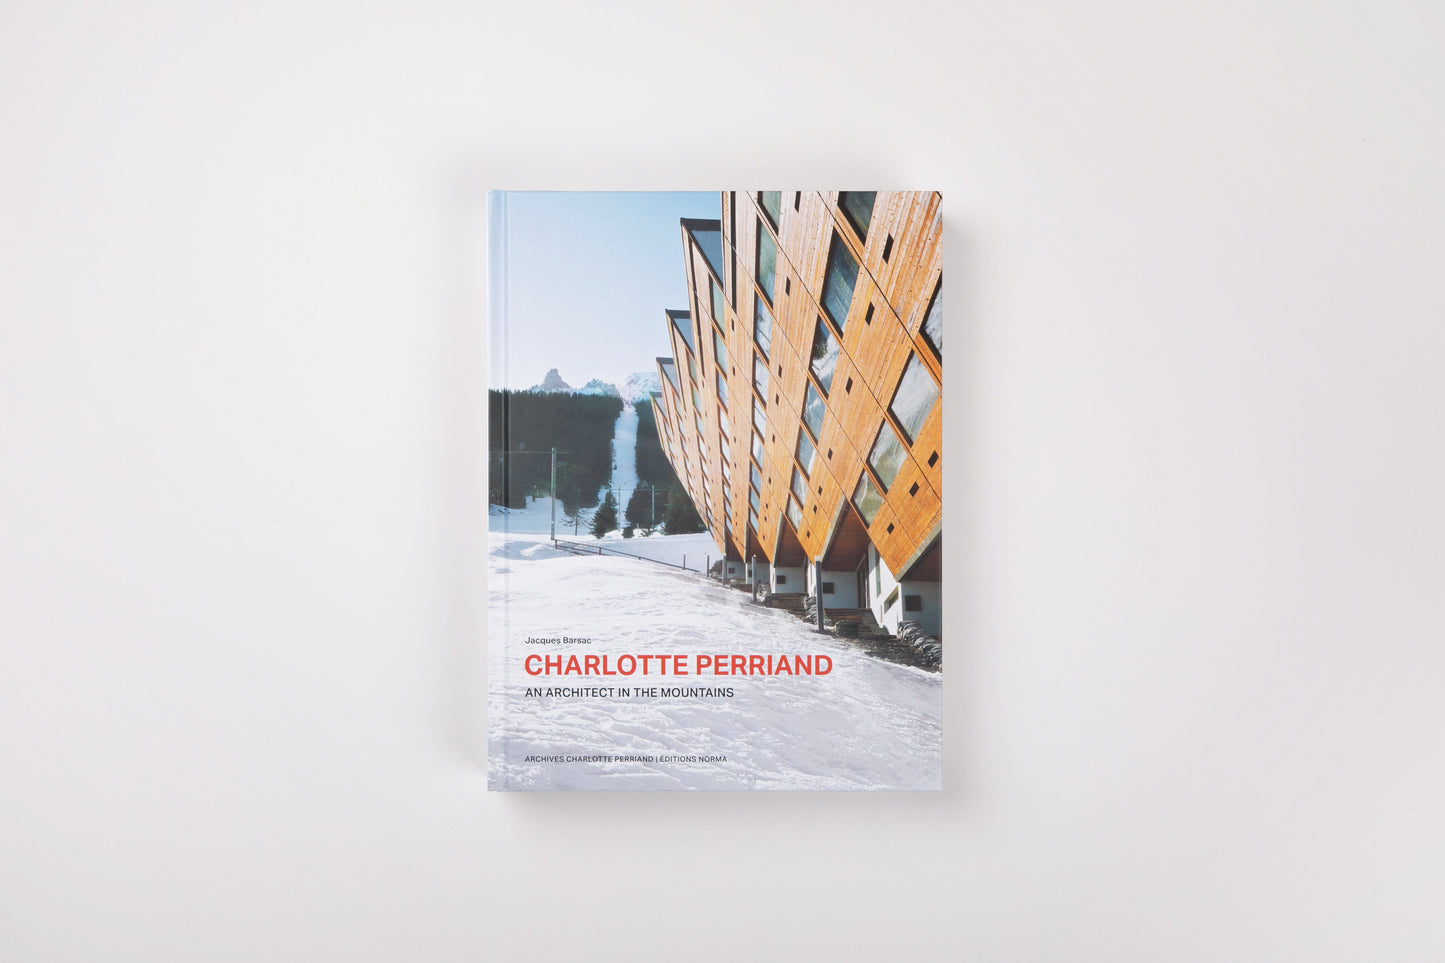 Charlotte Perriand: An Architect in the Mountains.